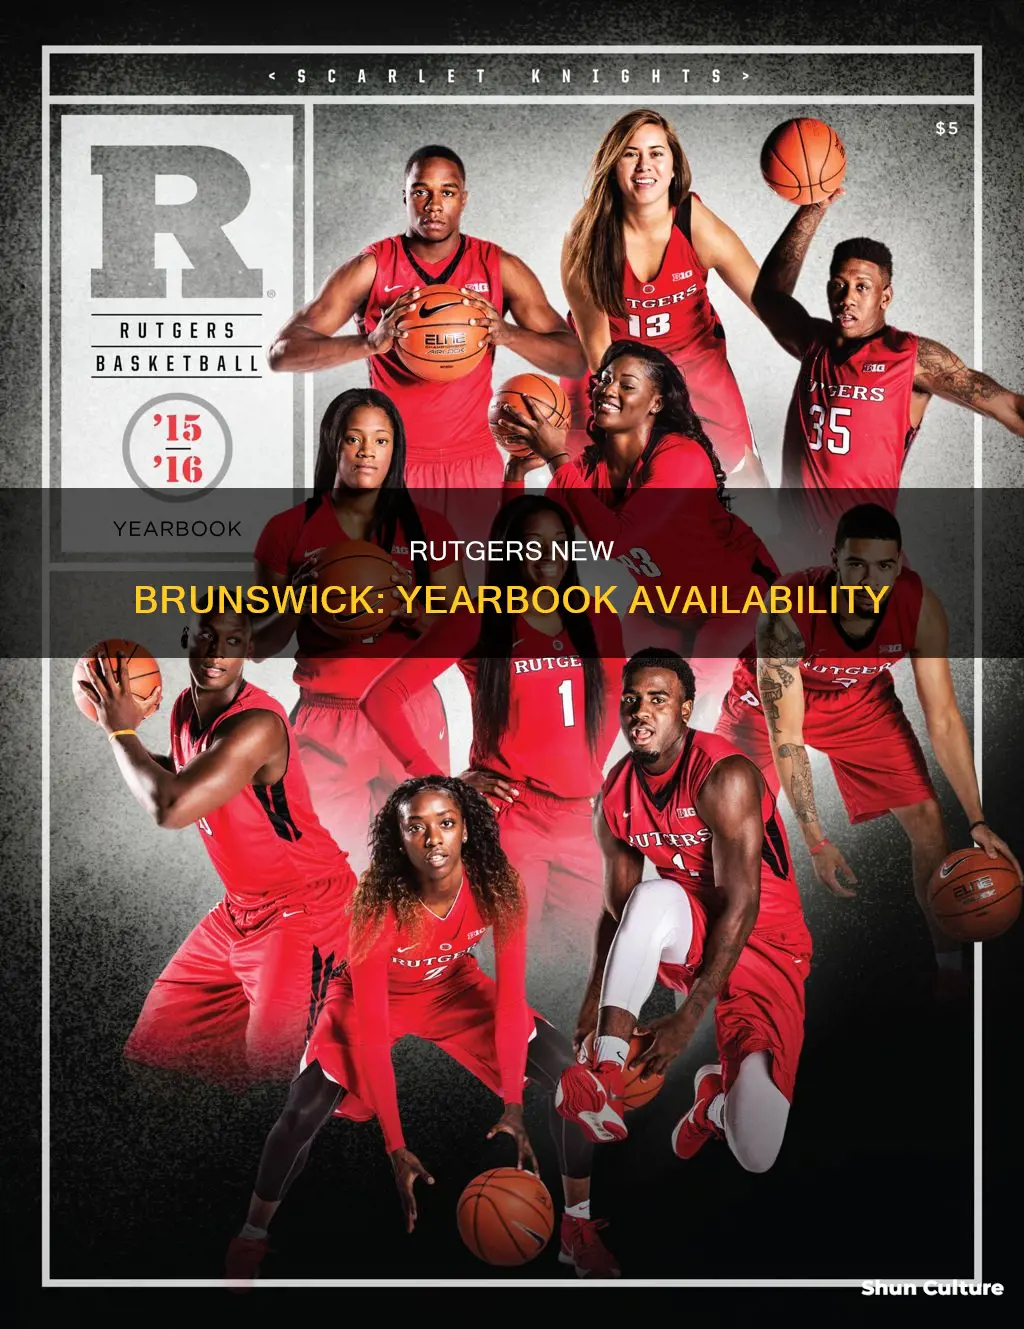 does rutgers new brunswick have a yearbook